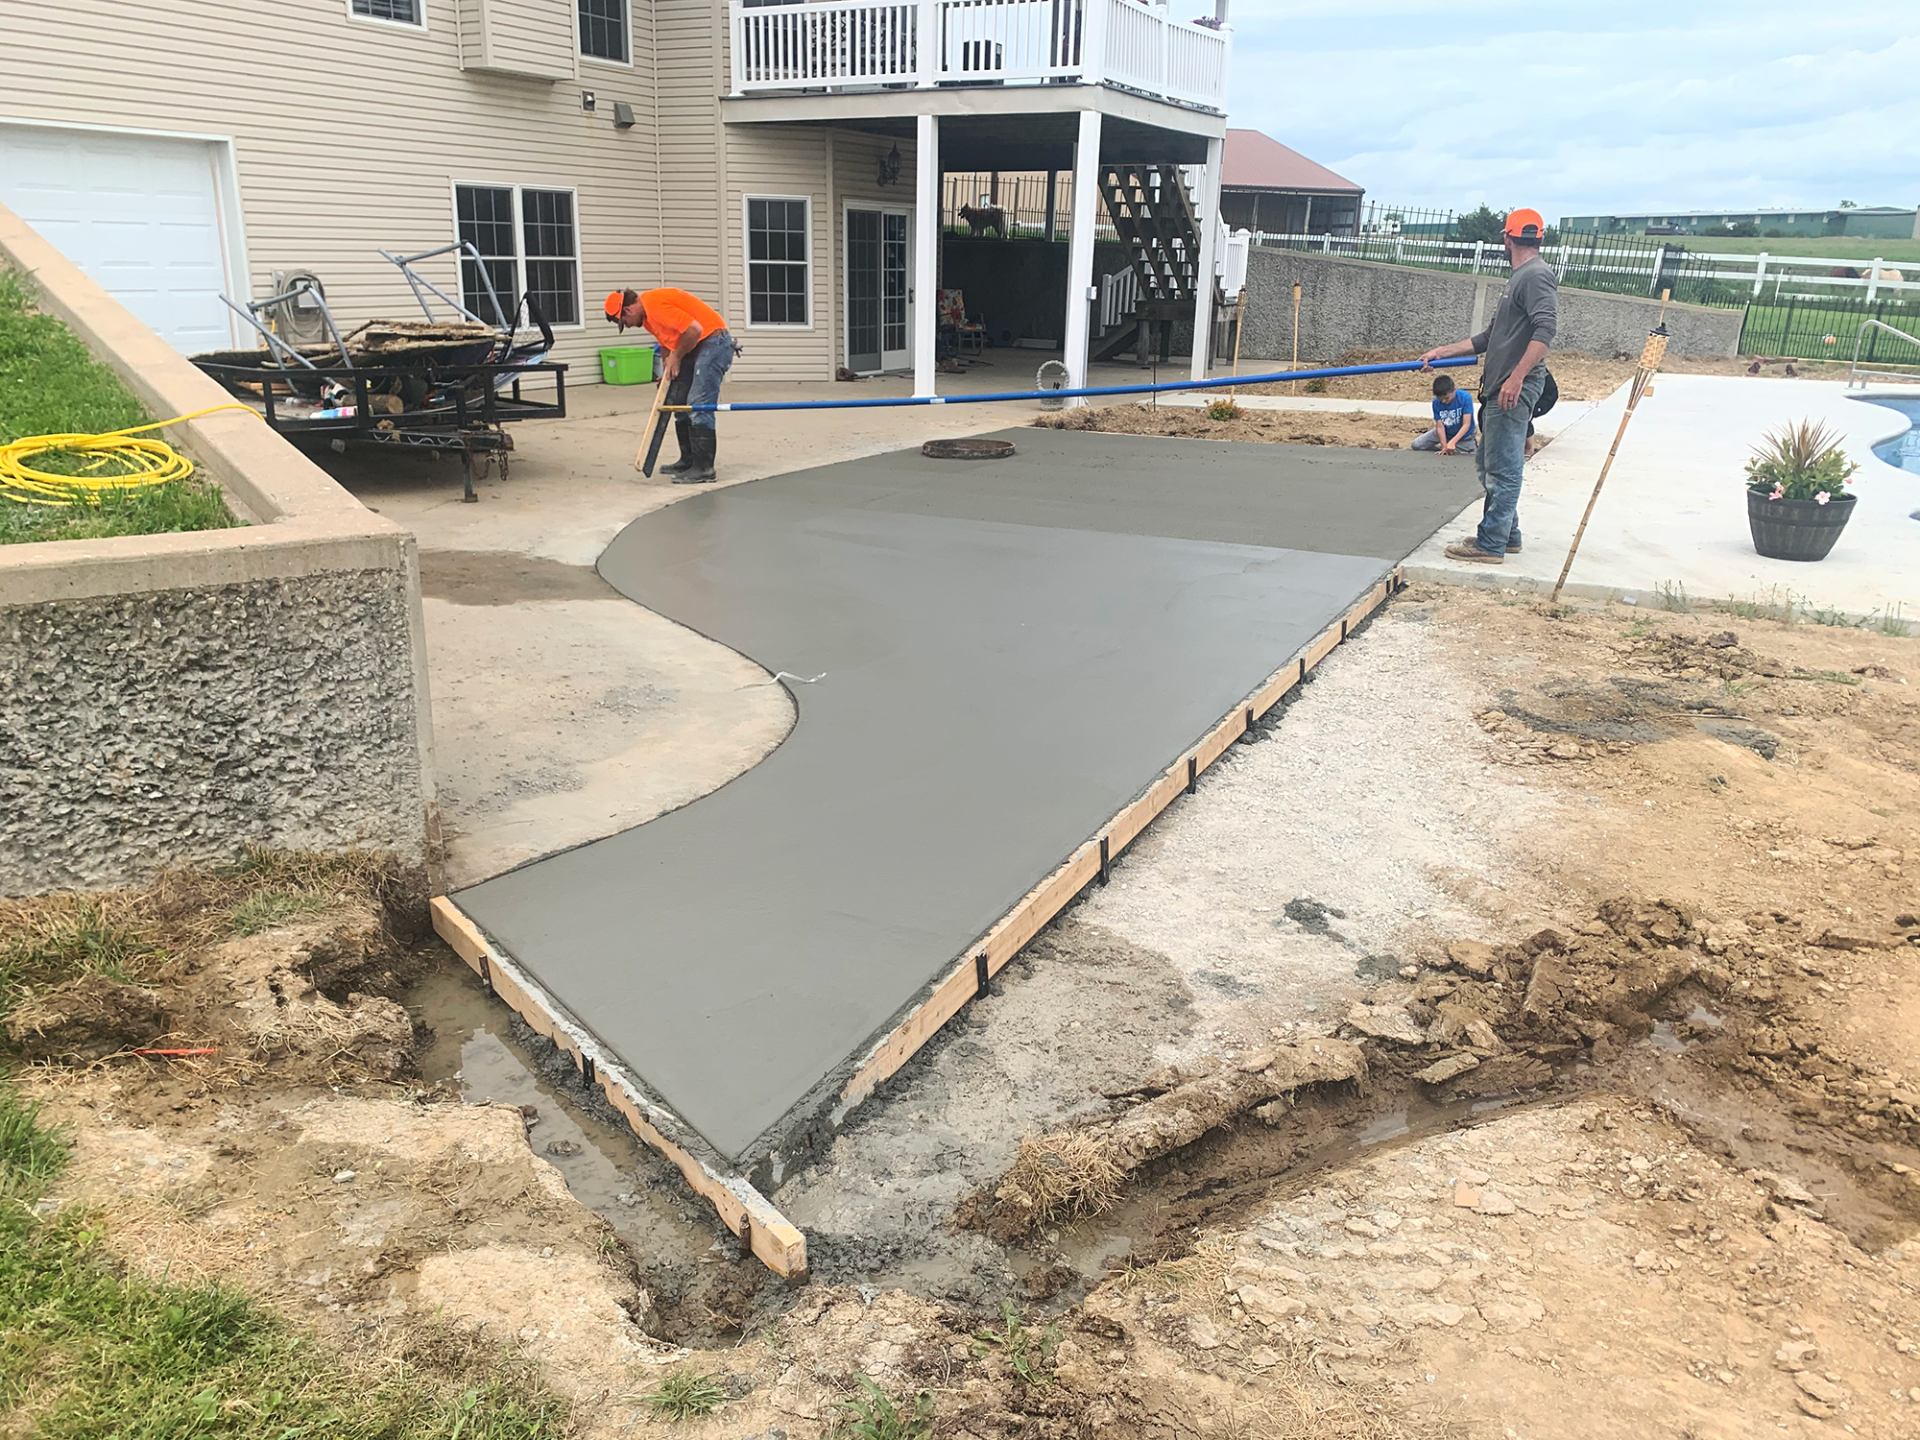 MoSEAL Knows Paving Your Driveway in Columbia, MO Is One of the Most Important Choices You Can Make.